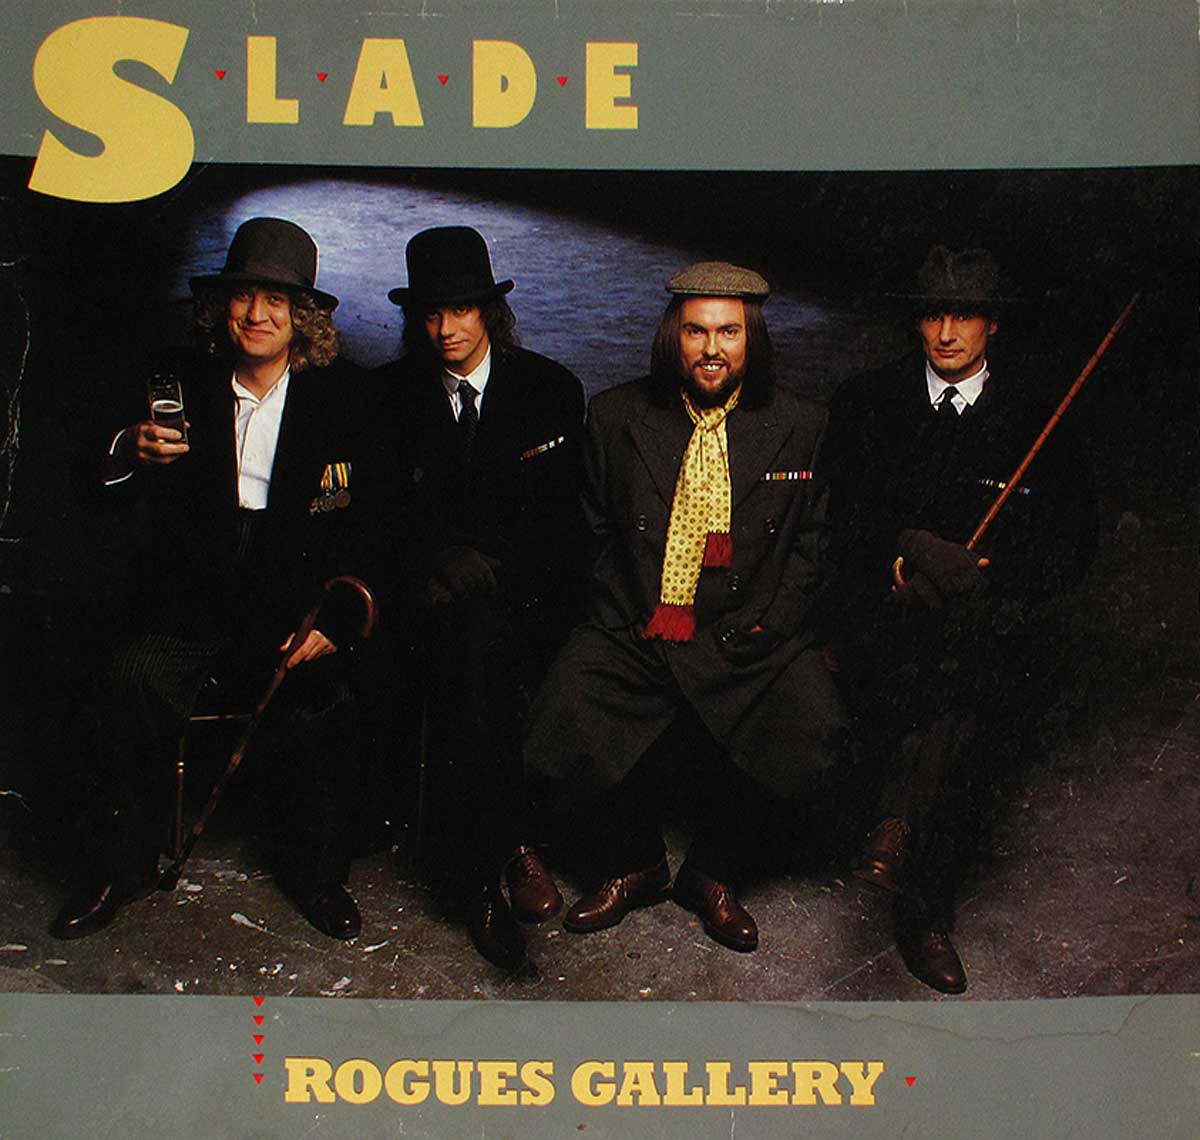 large album front cover photo of: SLADE - ROGUES GALLERY 